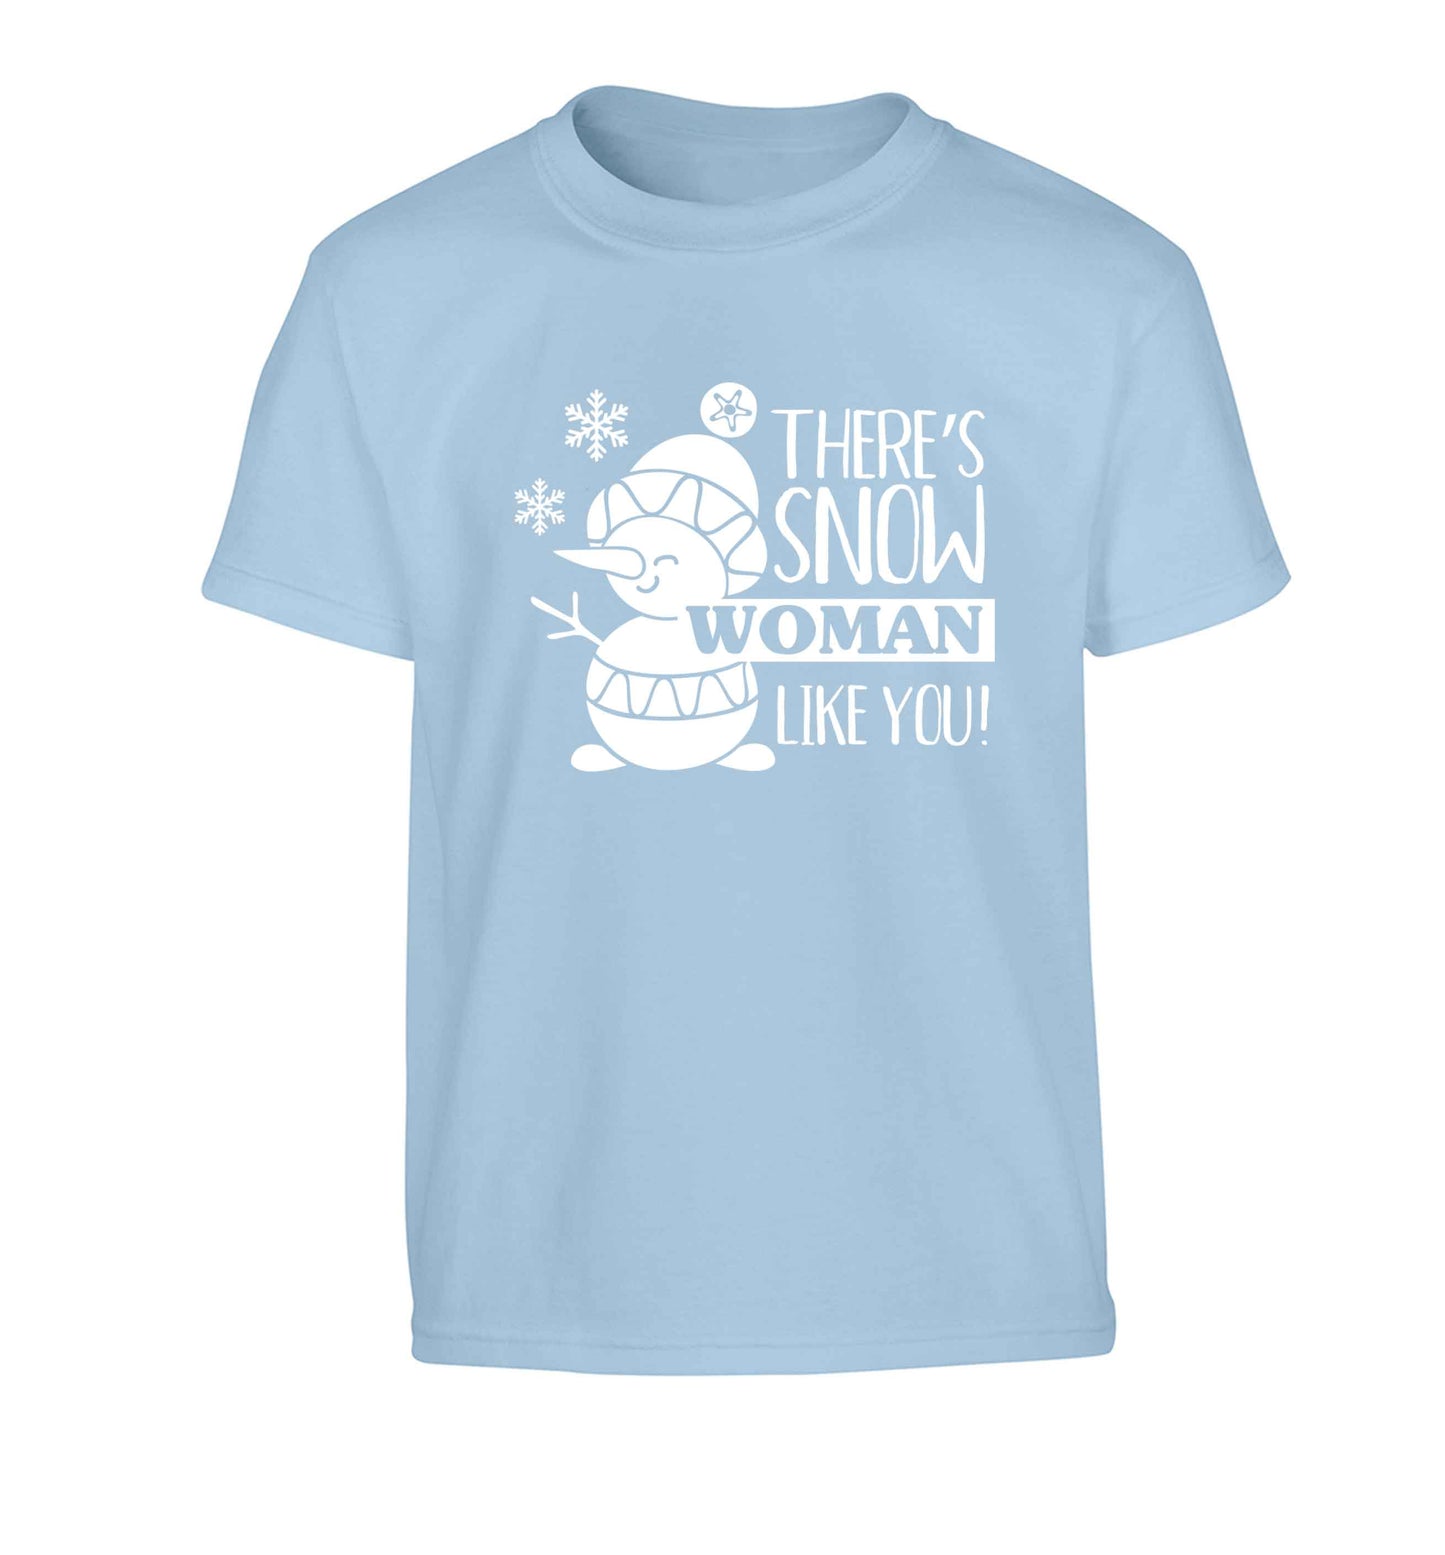 There's snow woman like you Children's light blue Tshirt 12-13 Years